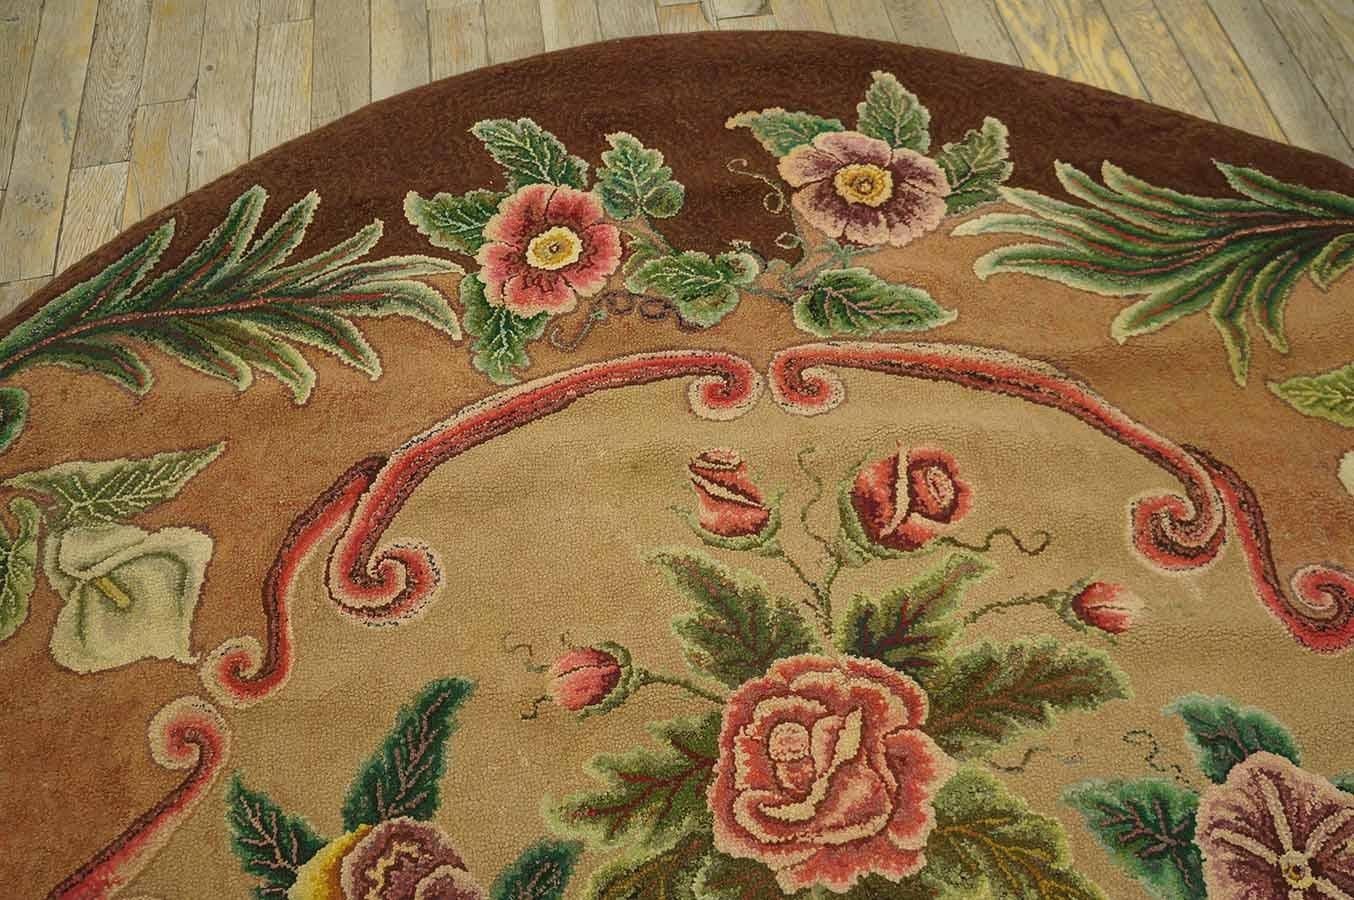 Early 20th Century American Hooked Rug ( 6'6